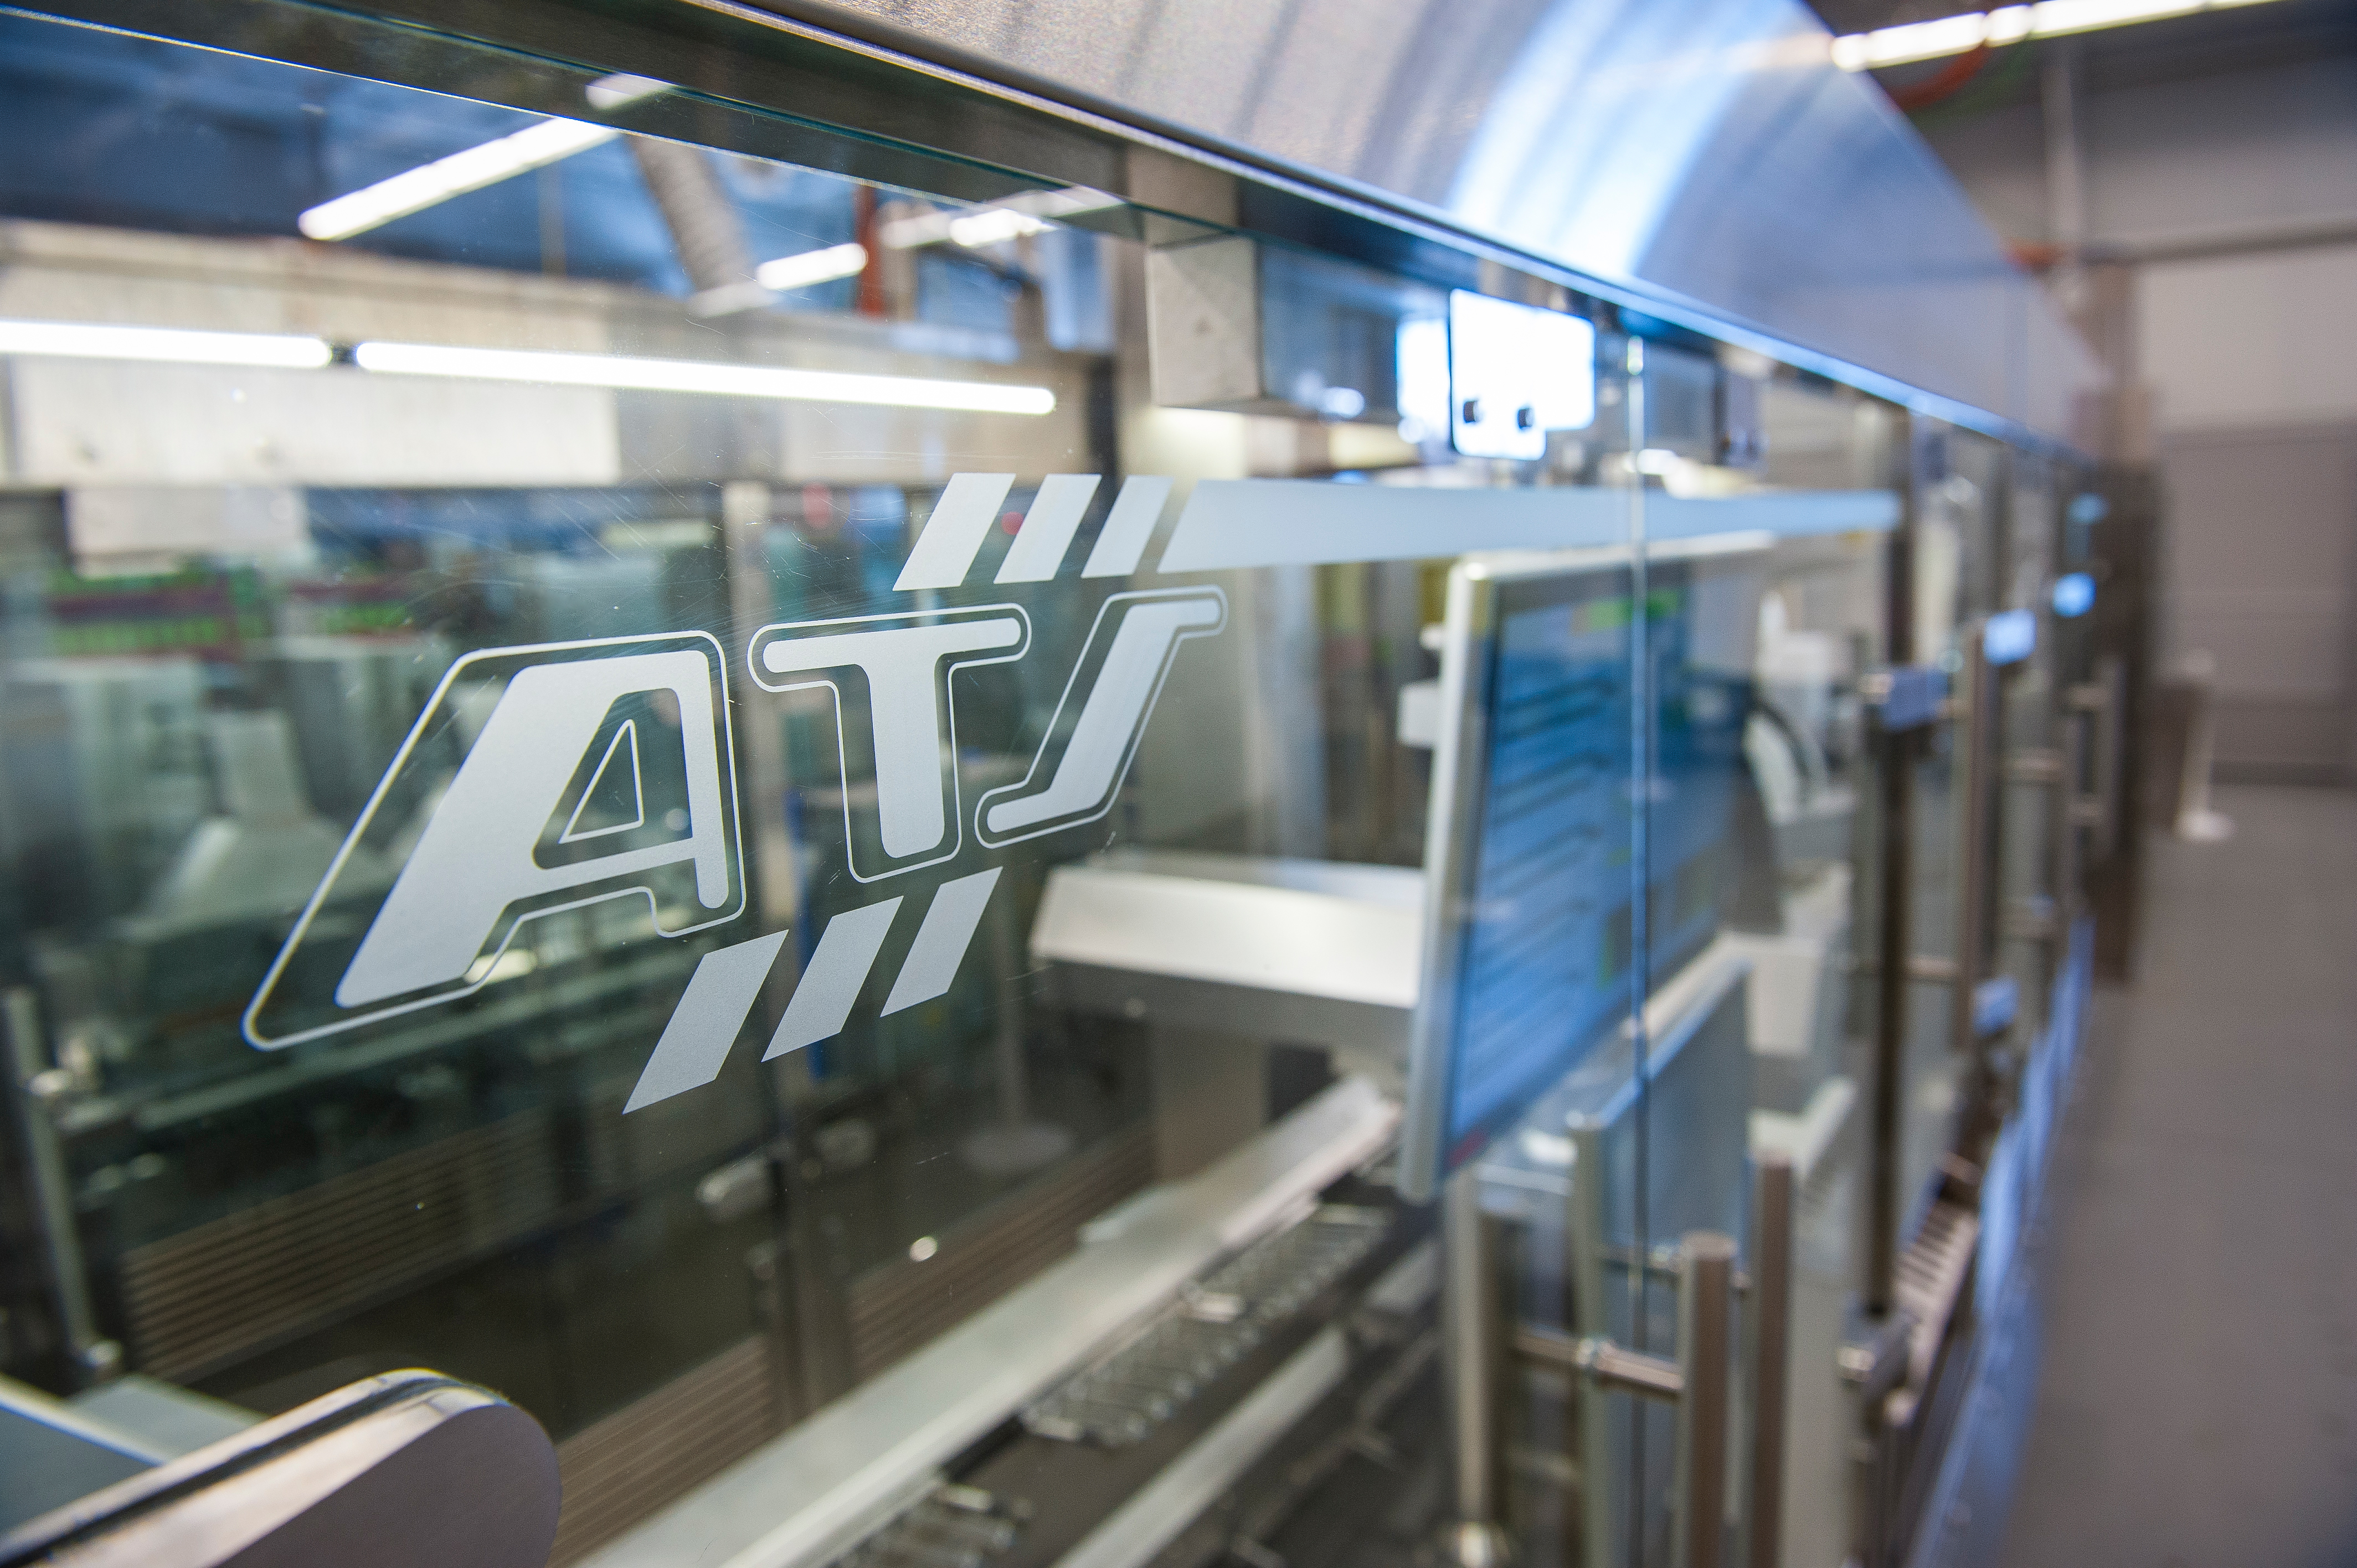 ATS logo on clear guard door for machine